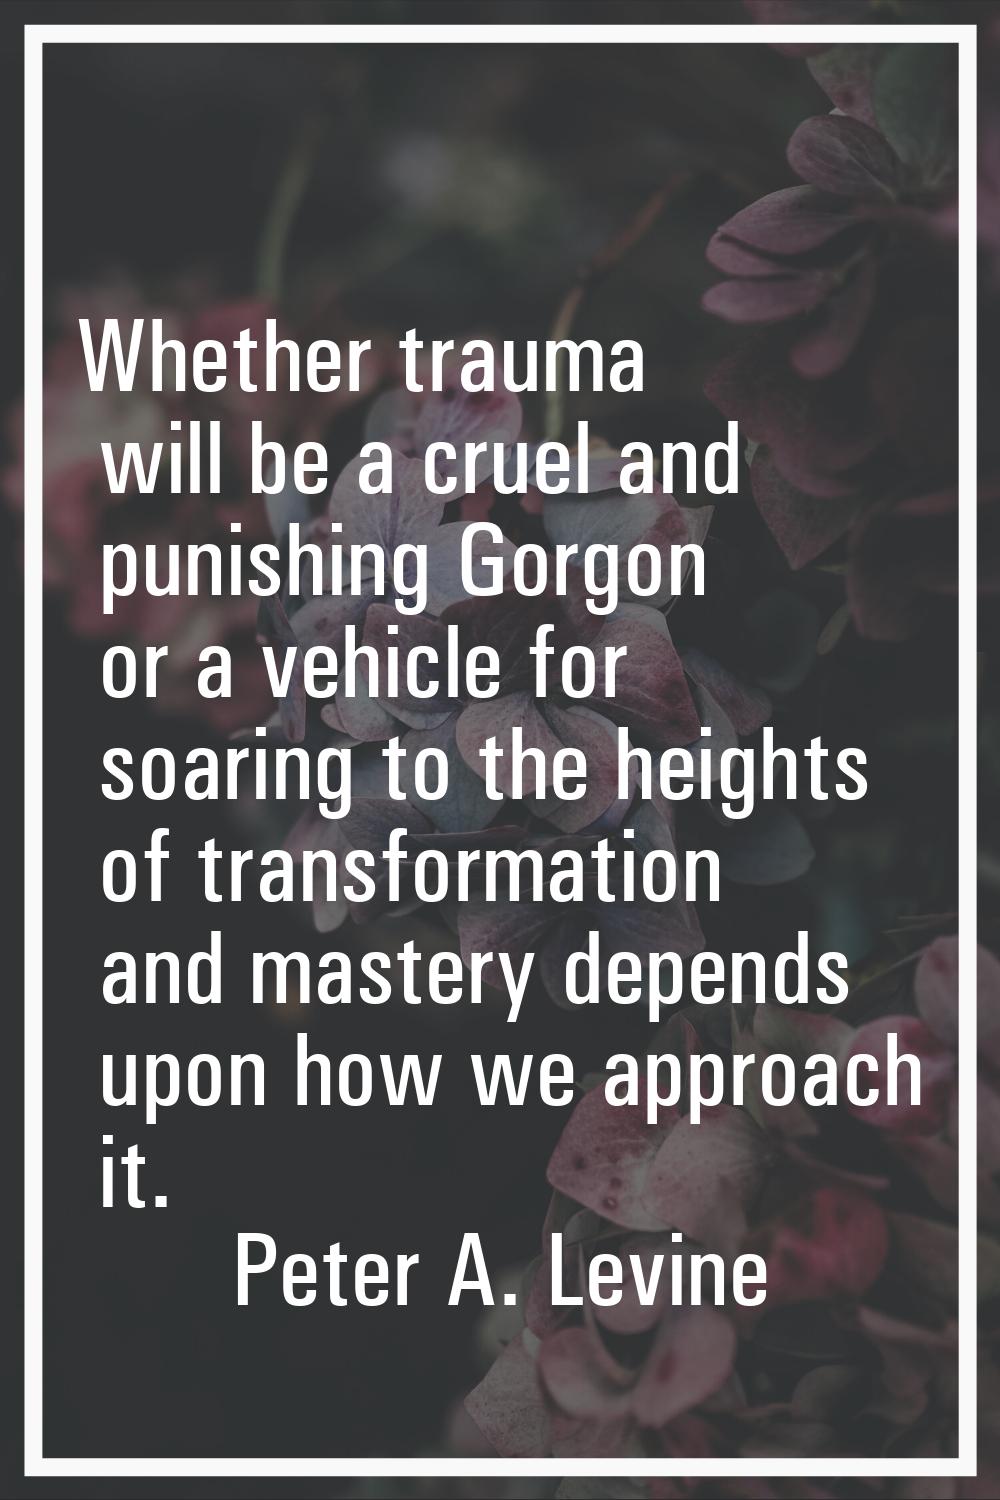 Whether trauma will be a cruel and punishing Gorgon or a vehicle for soaring to the heights of tran